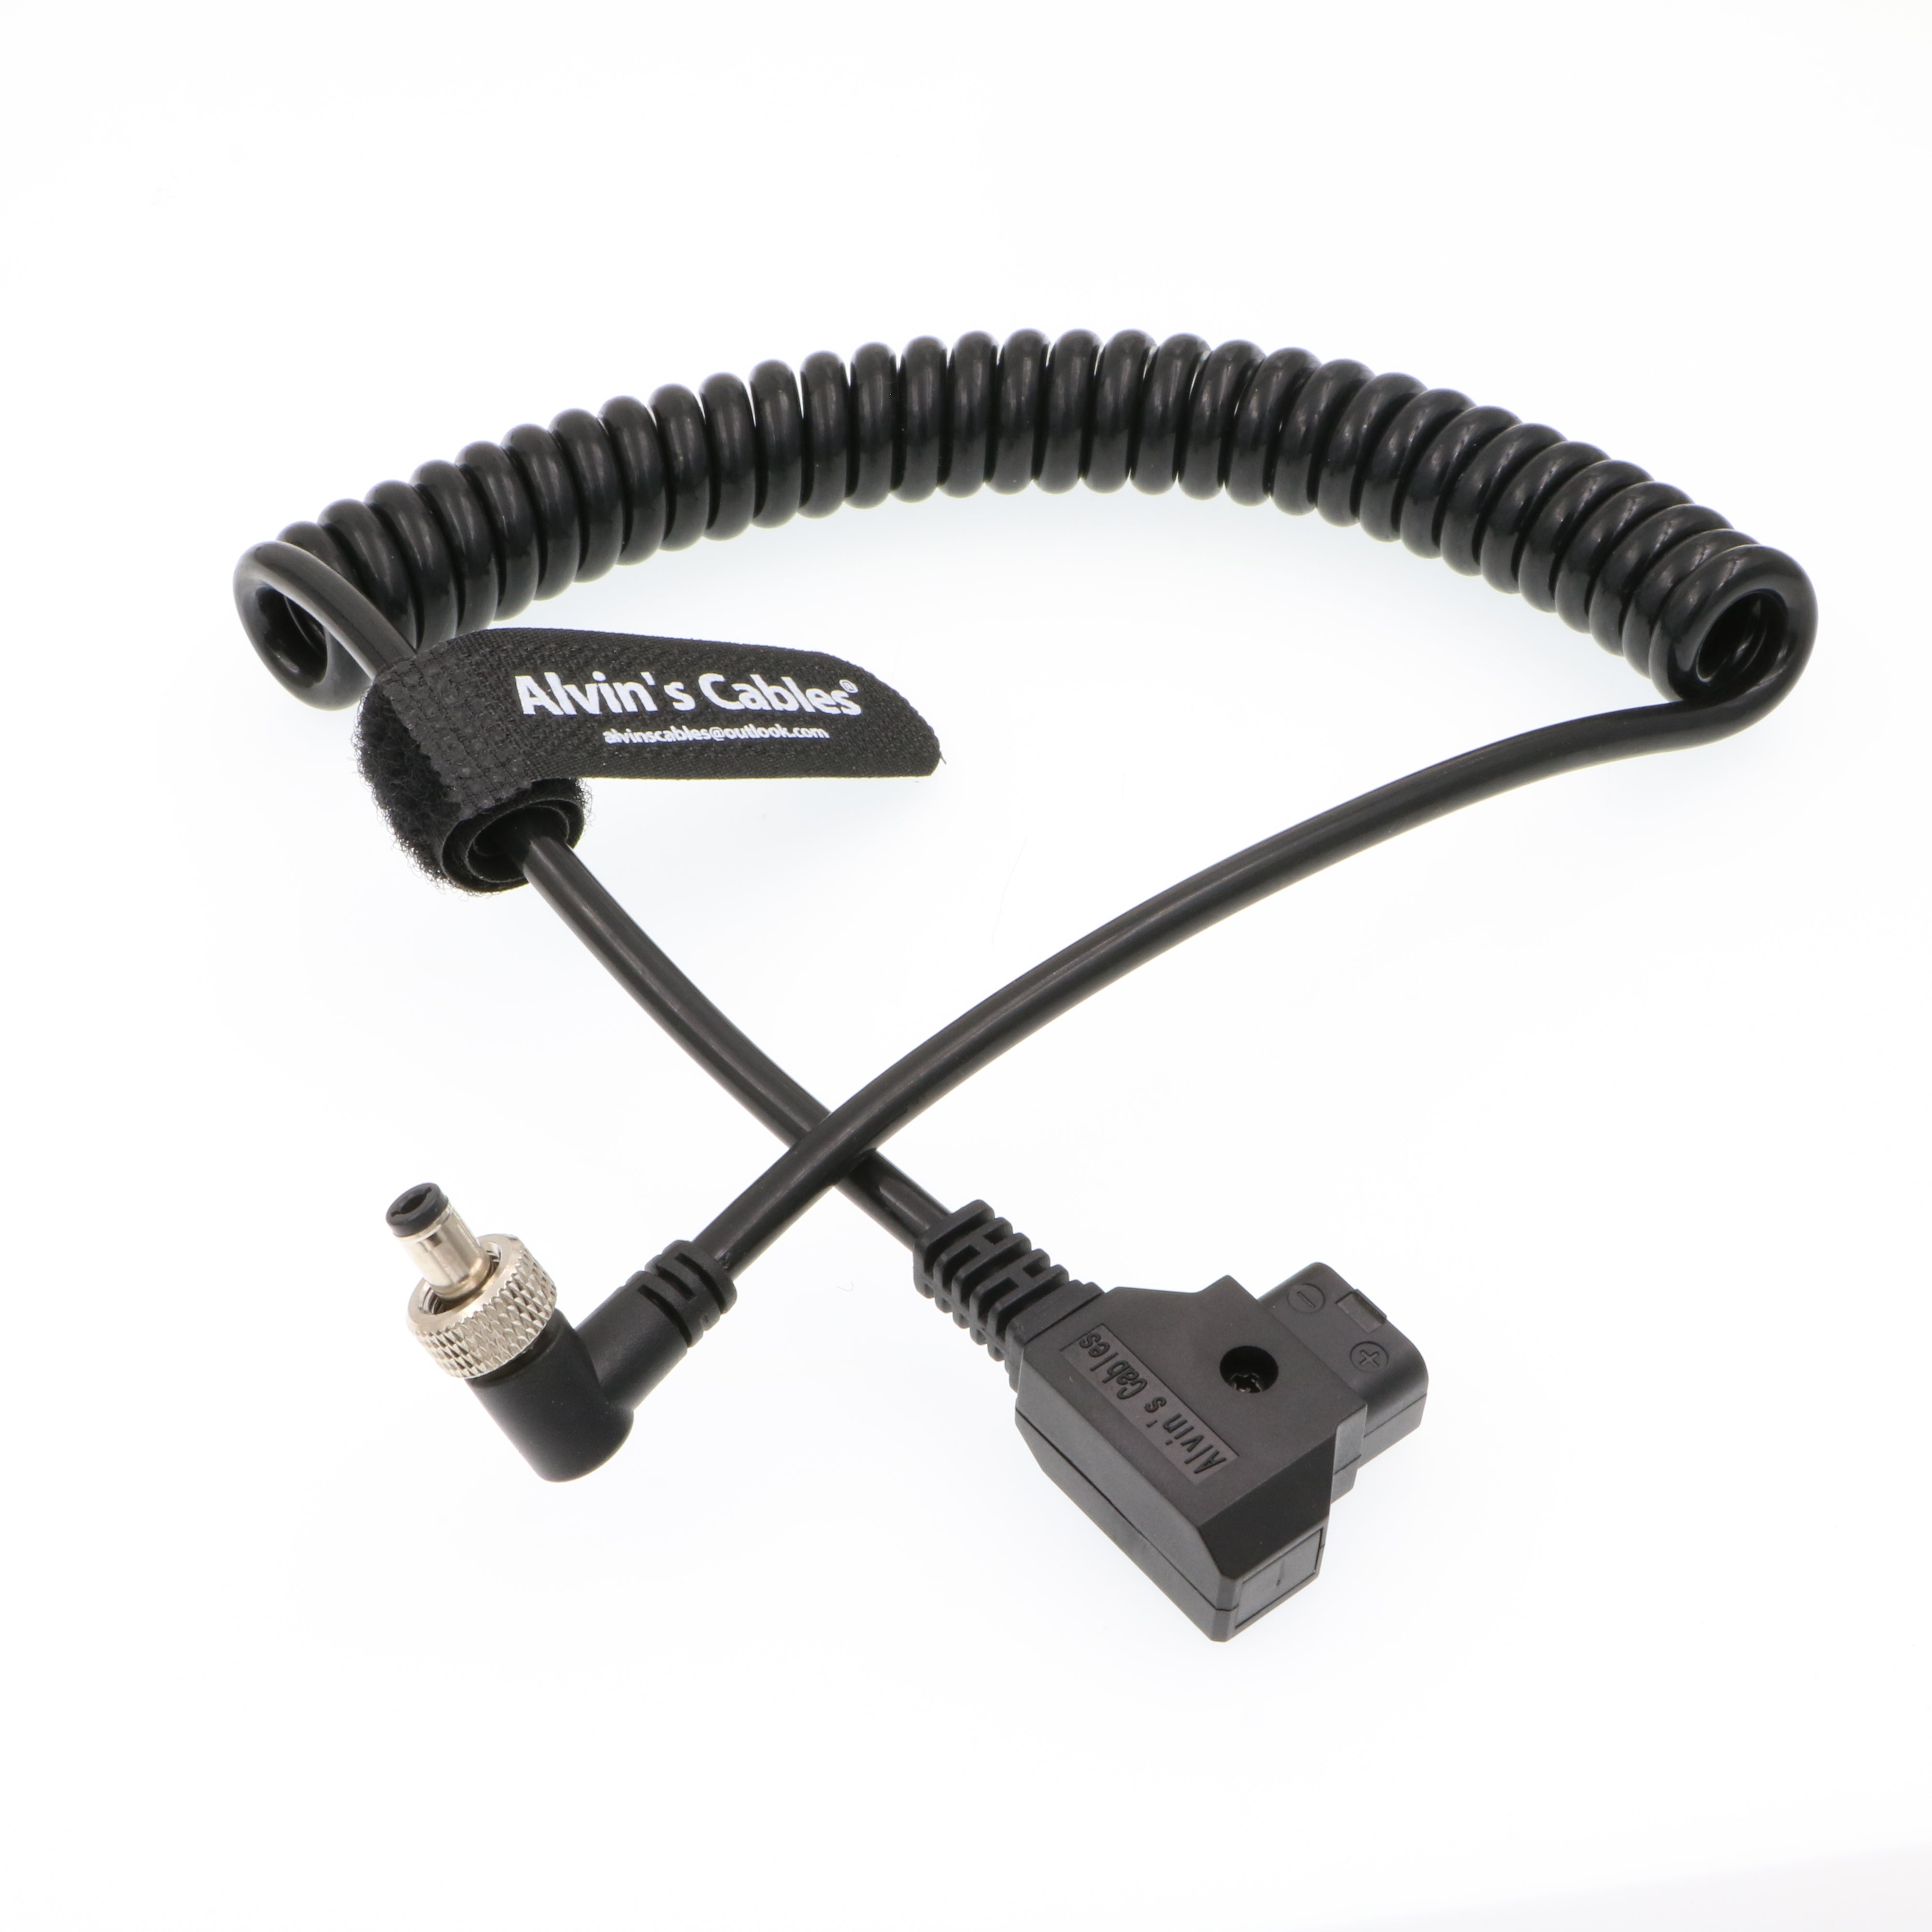 Alvin's Cables Atomos Monitor Coiled Power Cable Right Angle Locking DC 5.5 2.1 for Video Devices PIX-E7 PIX-E5 Touchscreen Display Hollyland Mars 400s